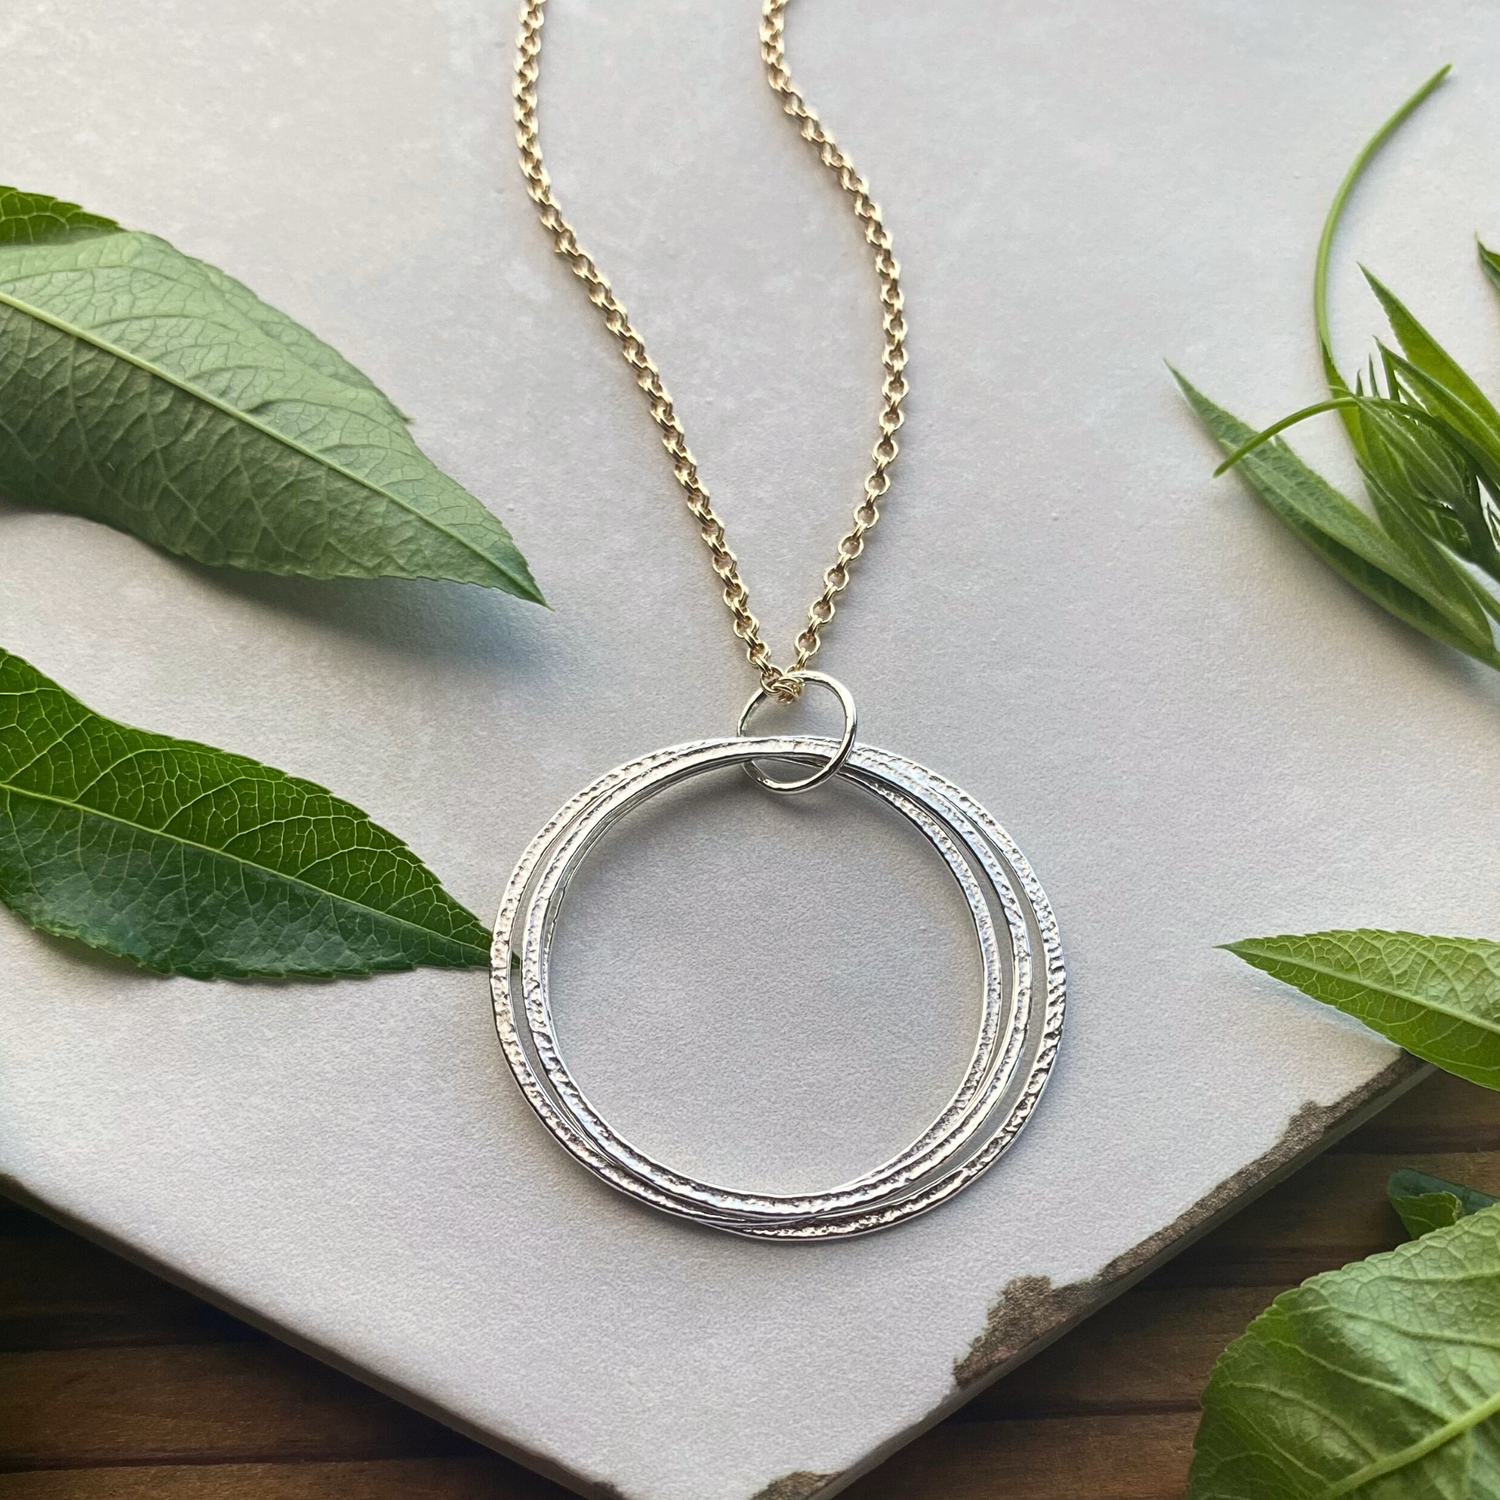 30th Birthday Necklace - Handcrafted Sterling Silver Large 3 Circle Pendant on 14K Gold Fill Chain